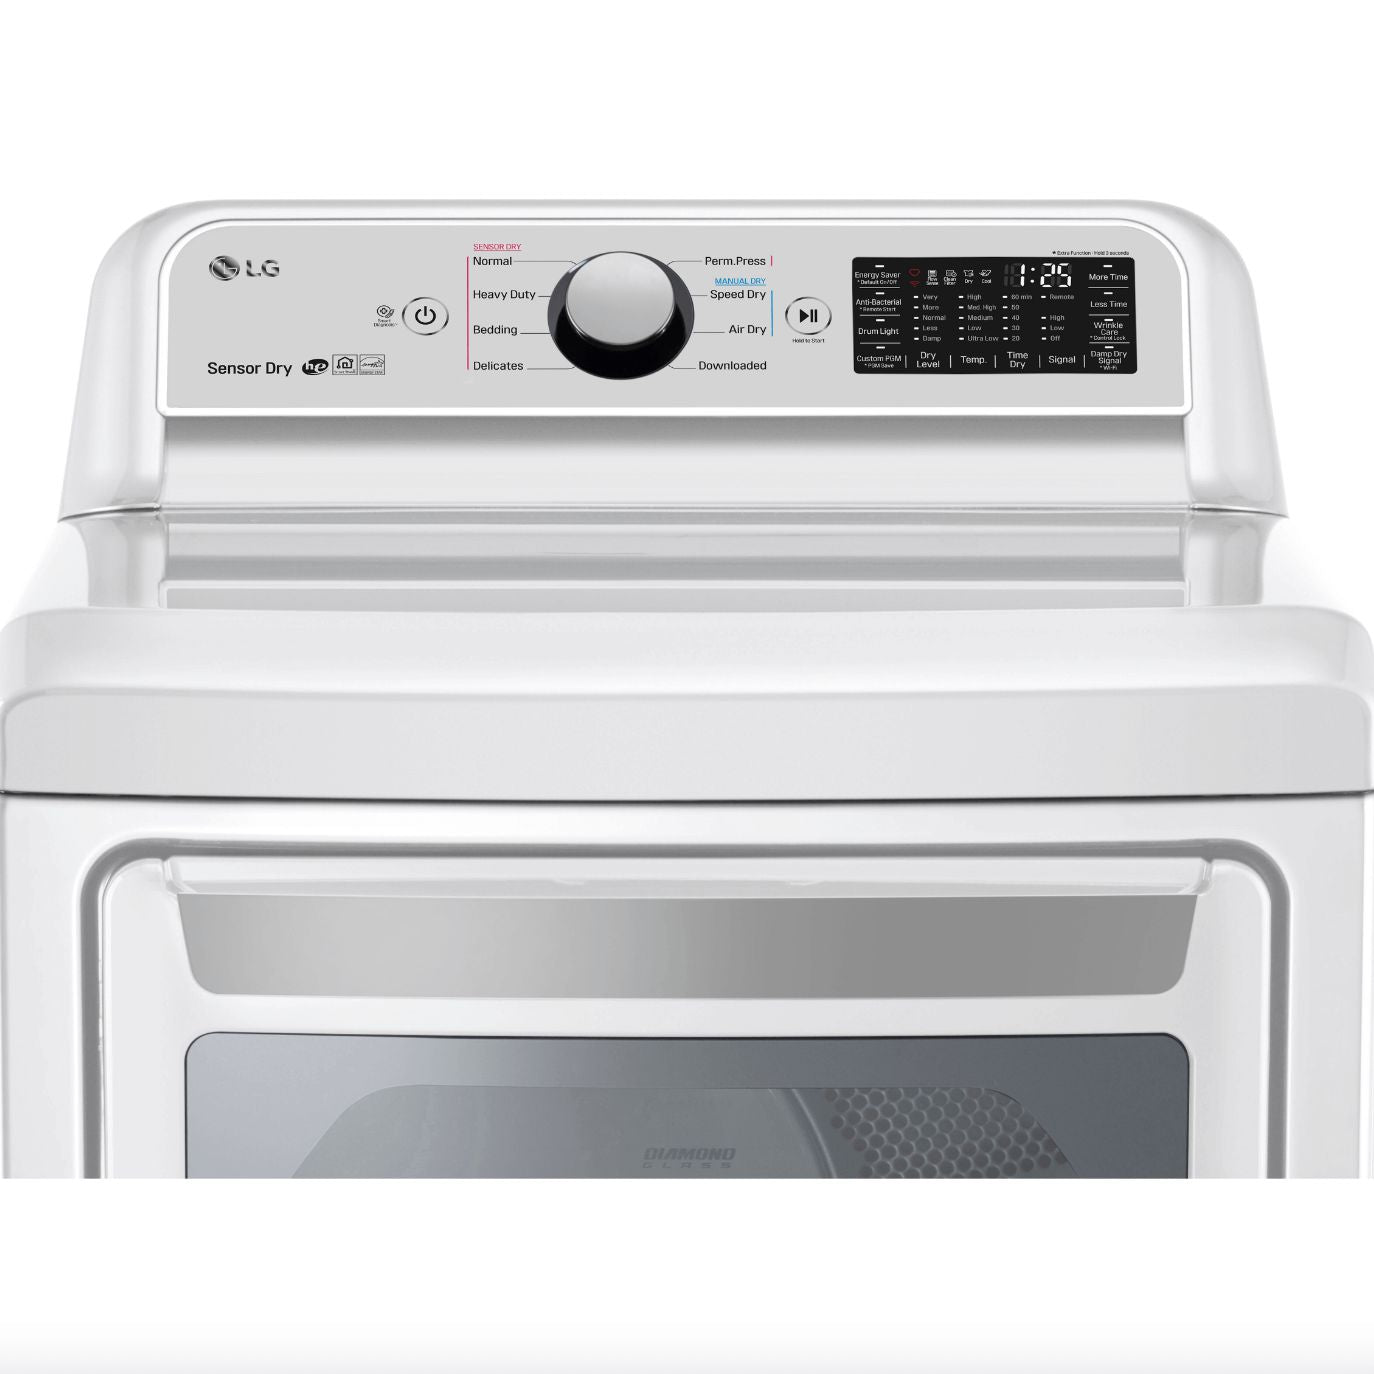 LG 27 Inch Rear Control Front Load Gas Dryer in White 7.3 cu. ft. (DLG7301WE)